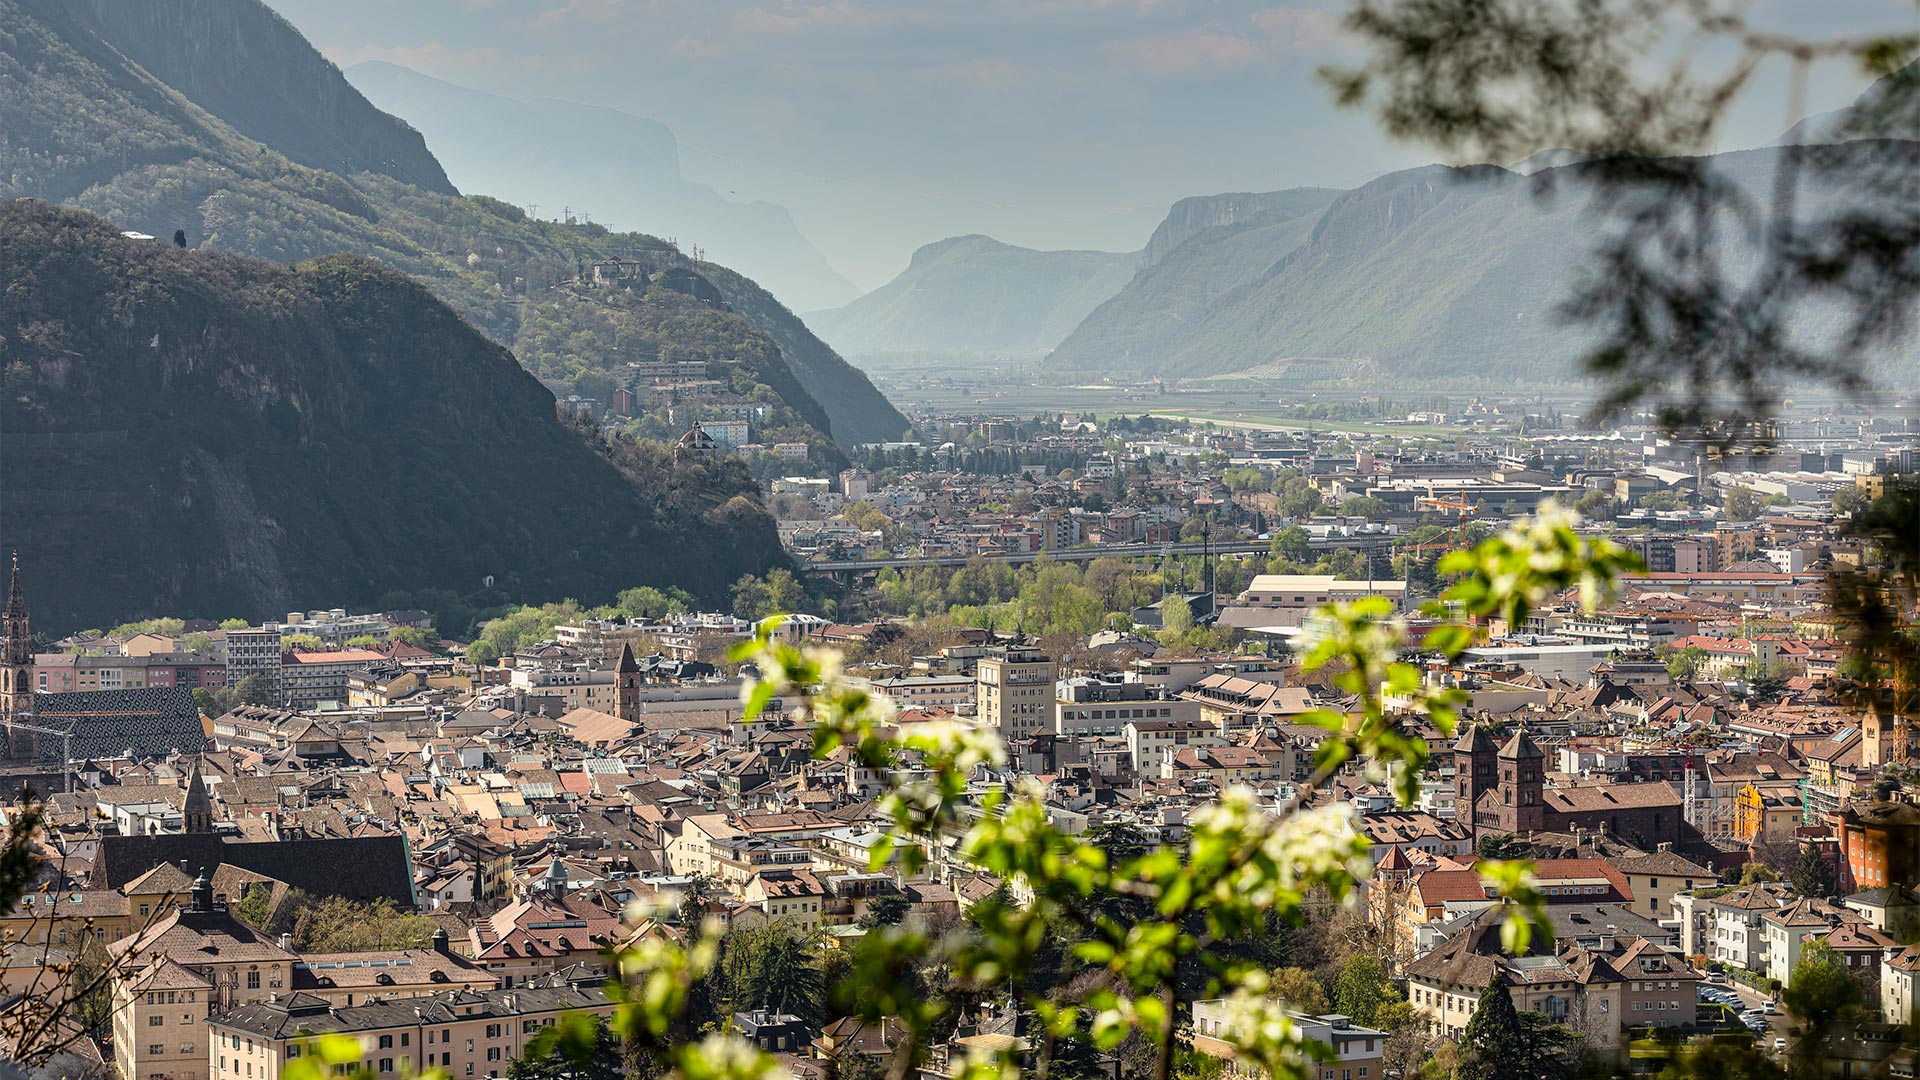 Panoramic view from the San Genesio path over the city of Bolzano on a summer afternoon.